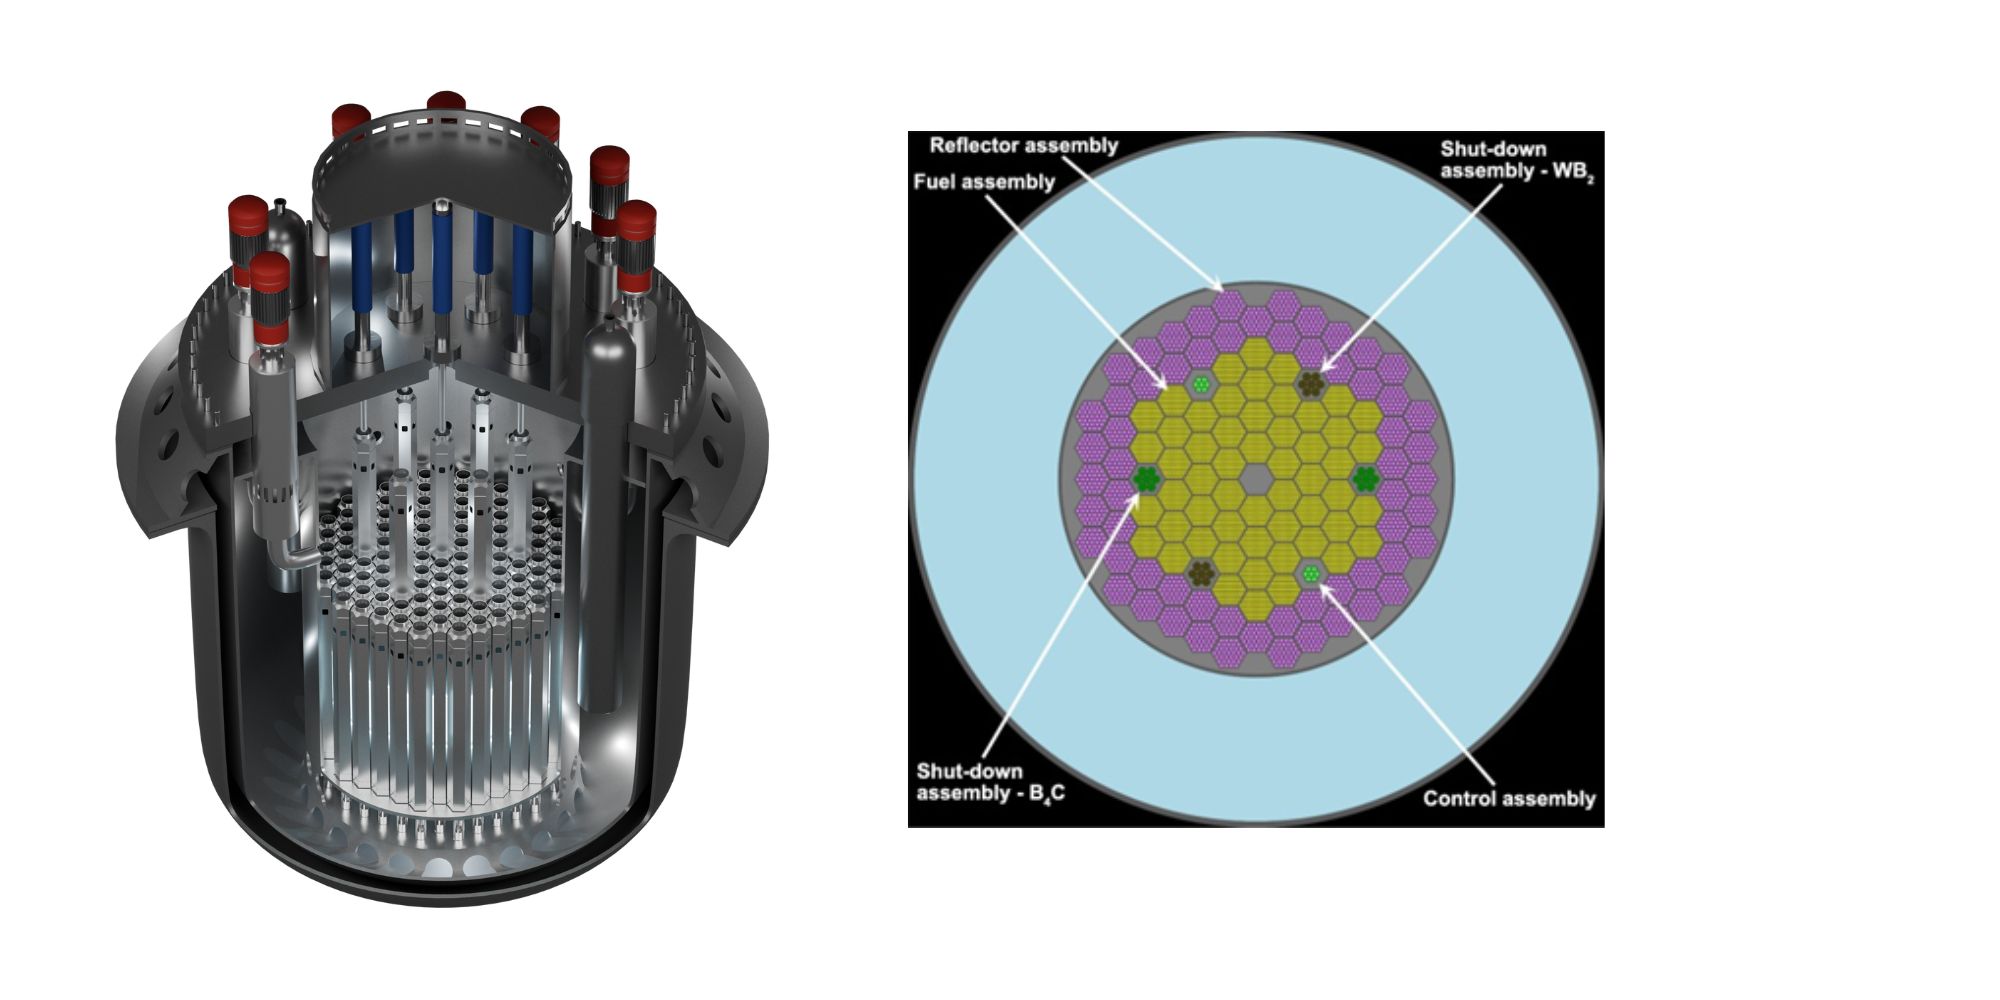 3D model of the SUNRISE reactor (left), and SUNRISE core distribution in SERPENT (right).